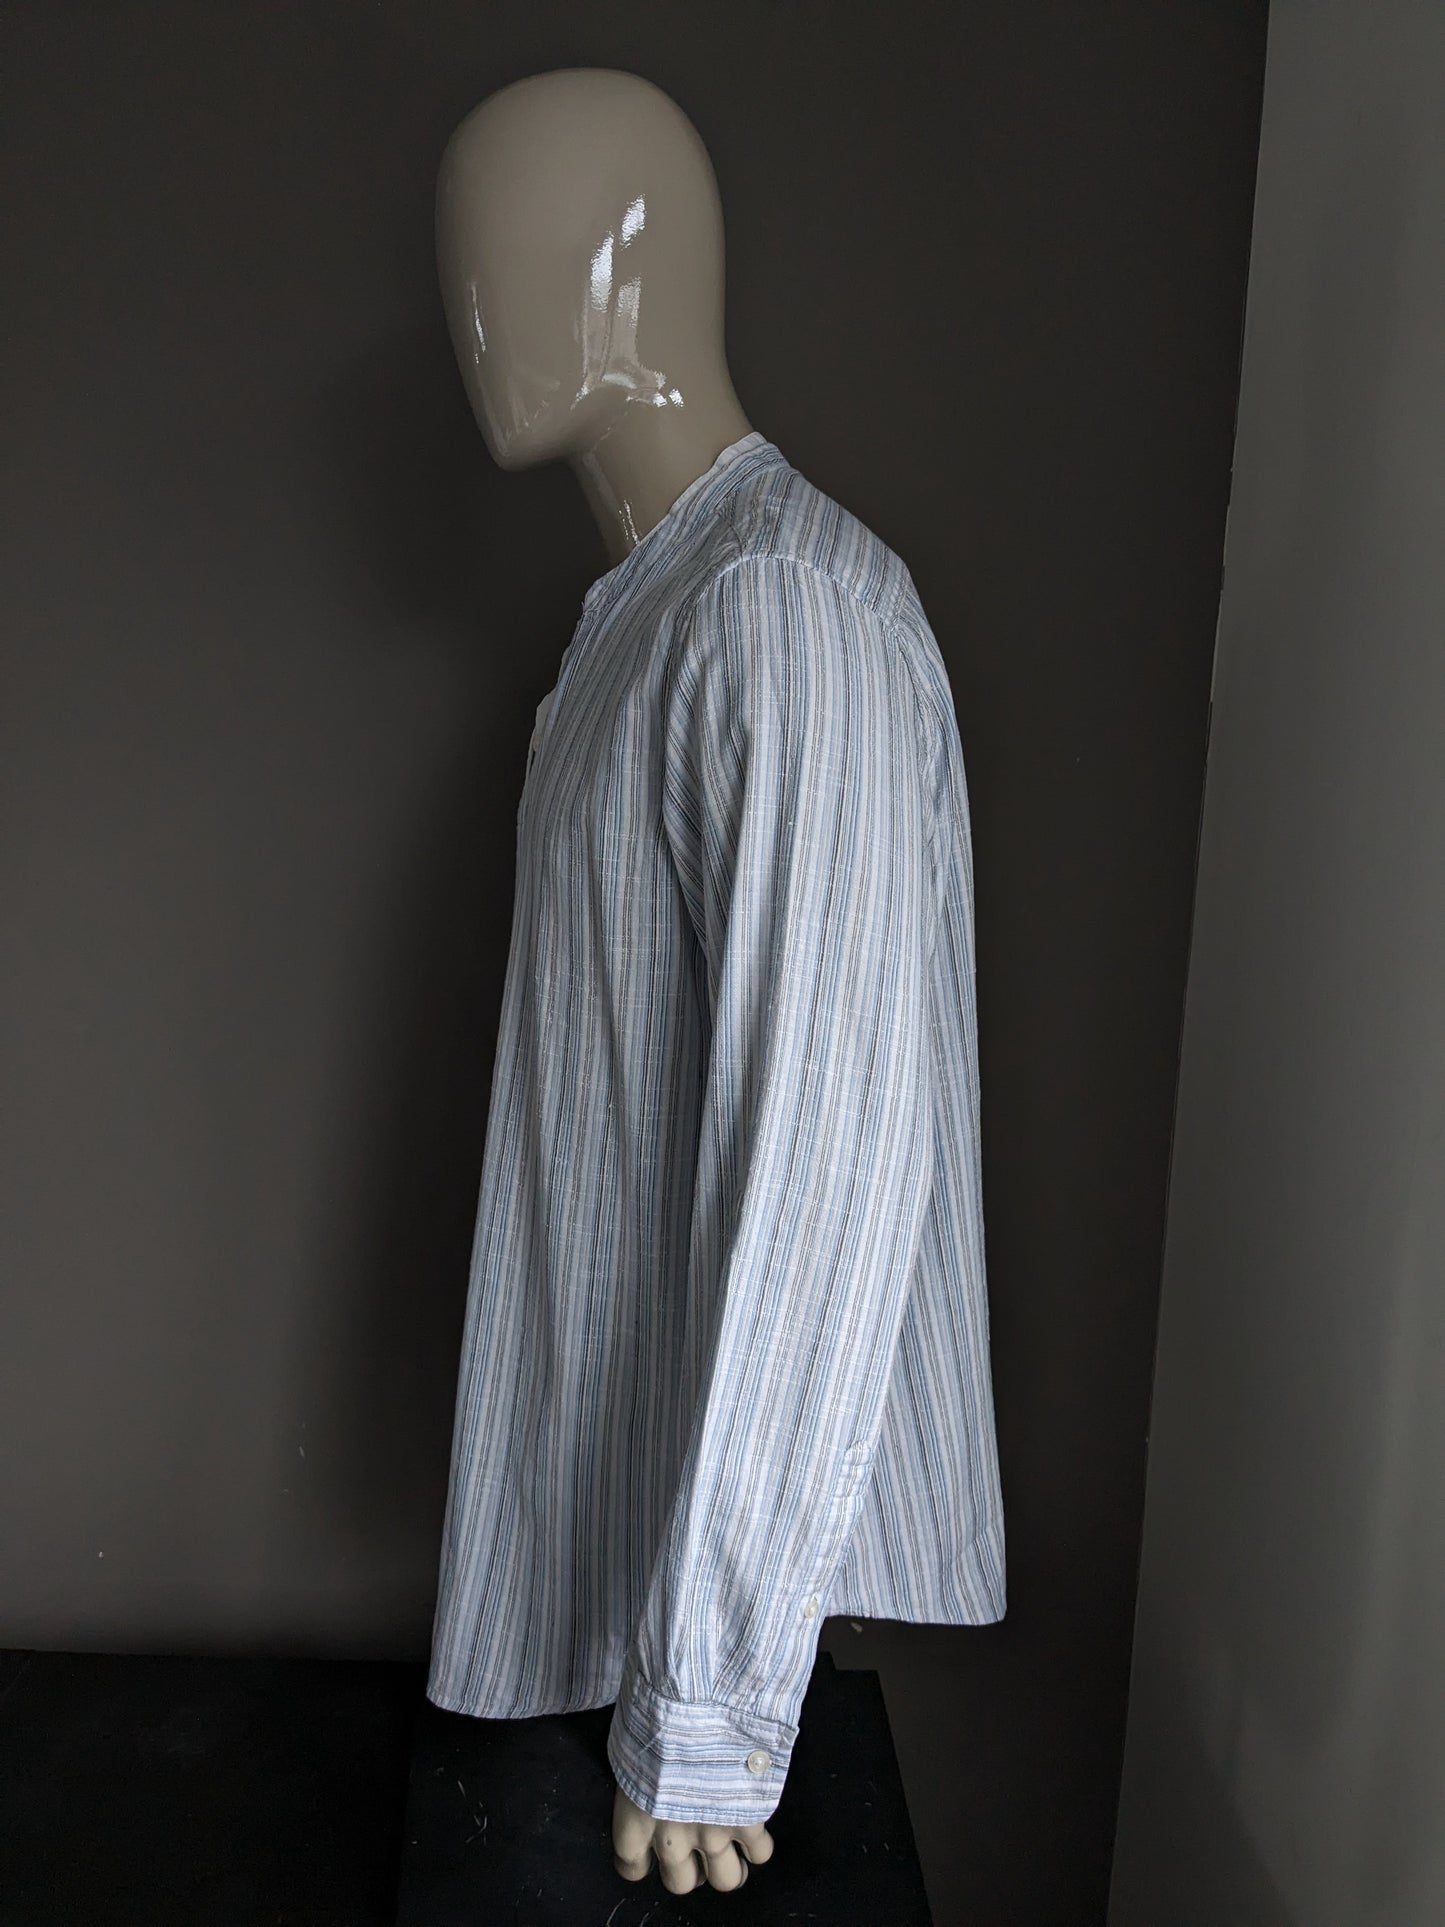 Vintage Cherokee shirt / shirt with mao / raised collar. Blue white gray striped. Size XL.